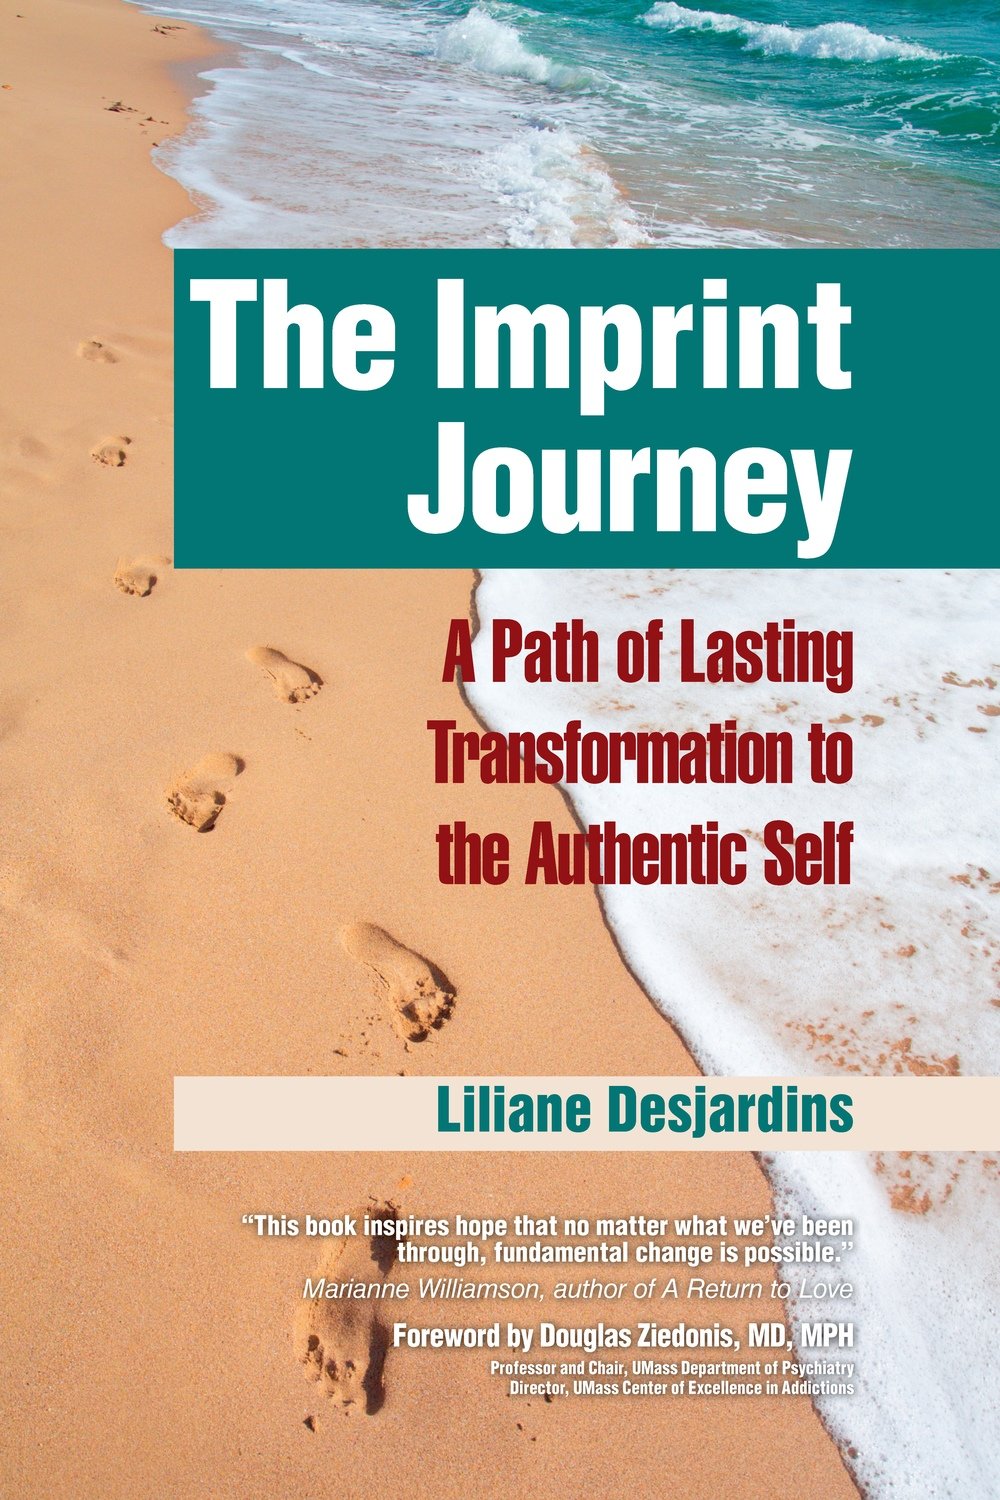 The Imprint Journey: A Path of Lasting Transformation Into Your Authentic Self